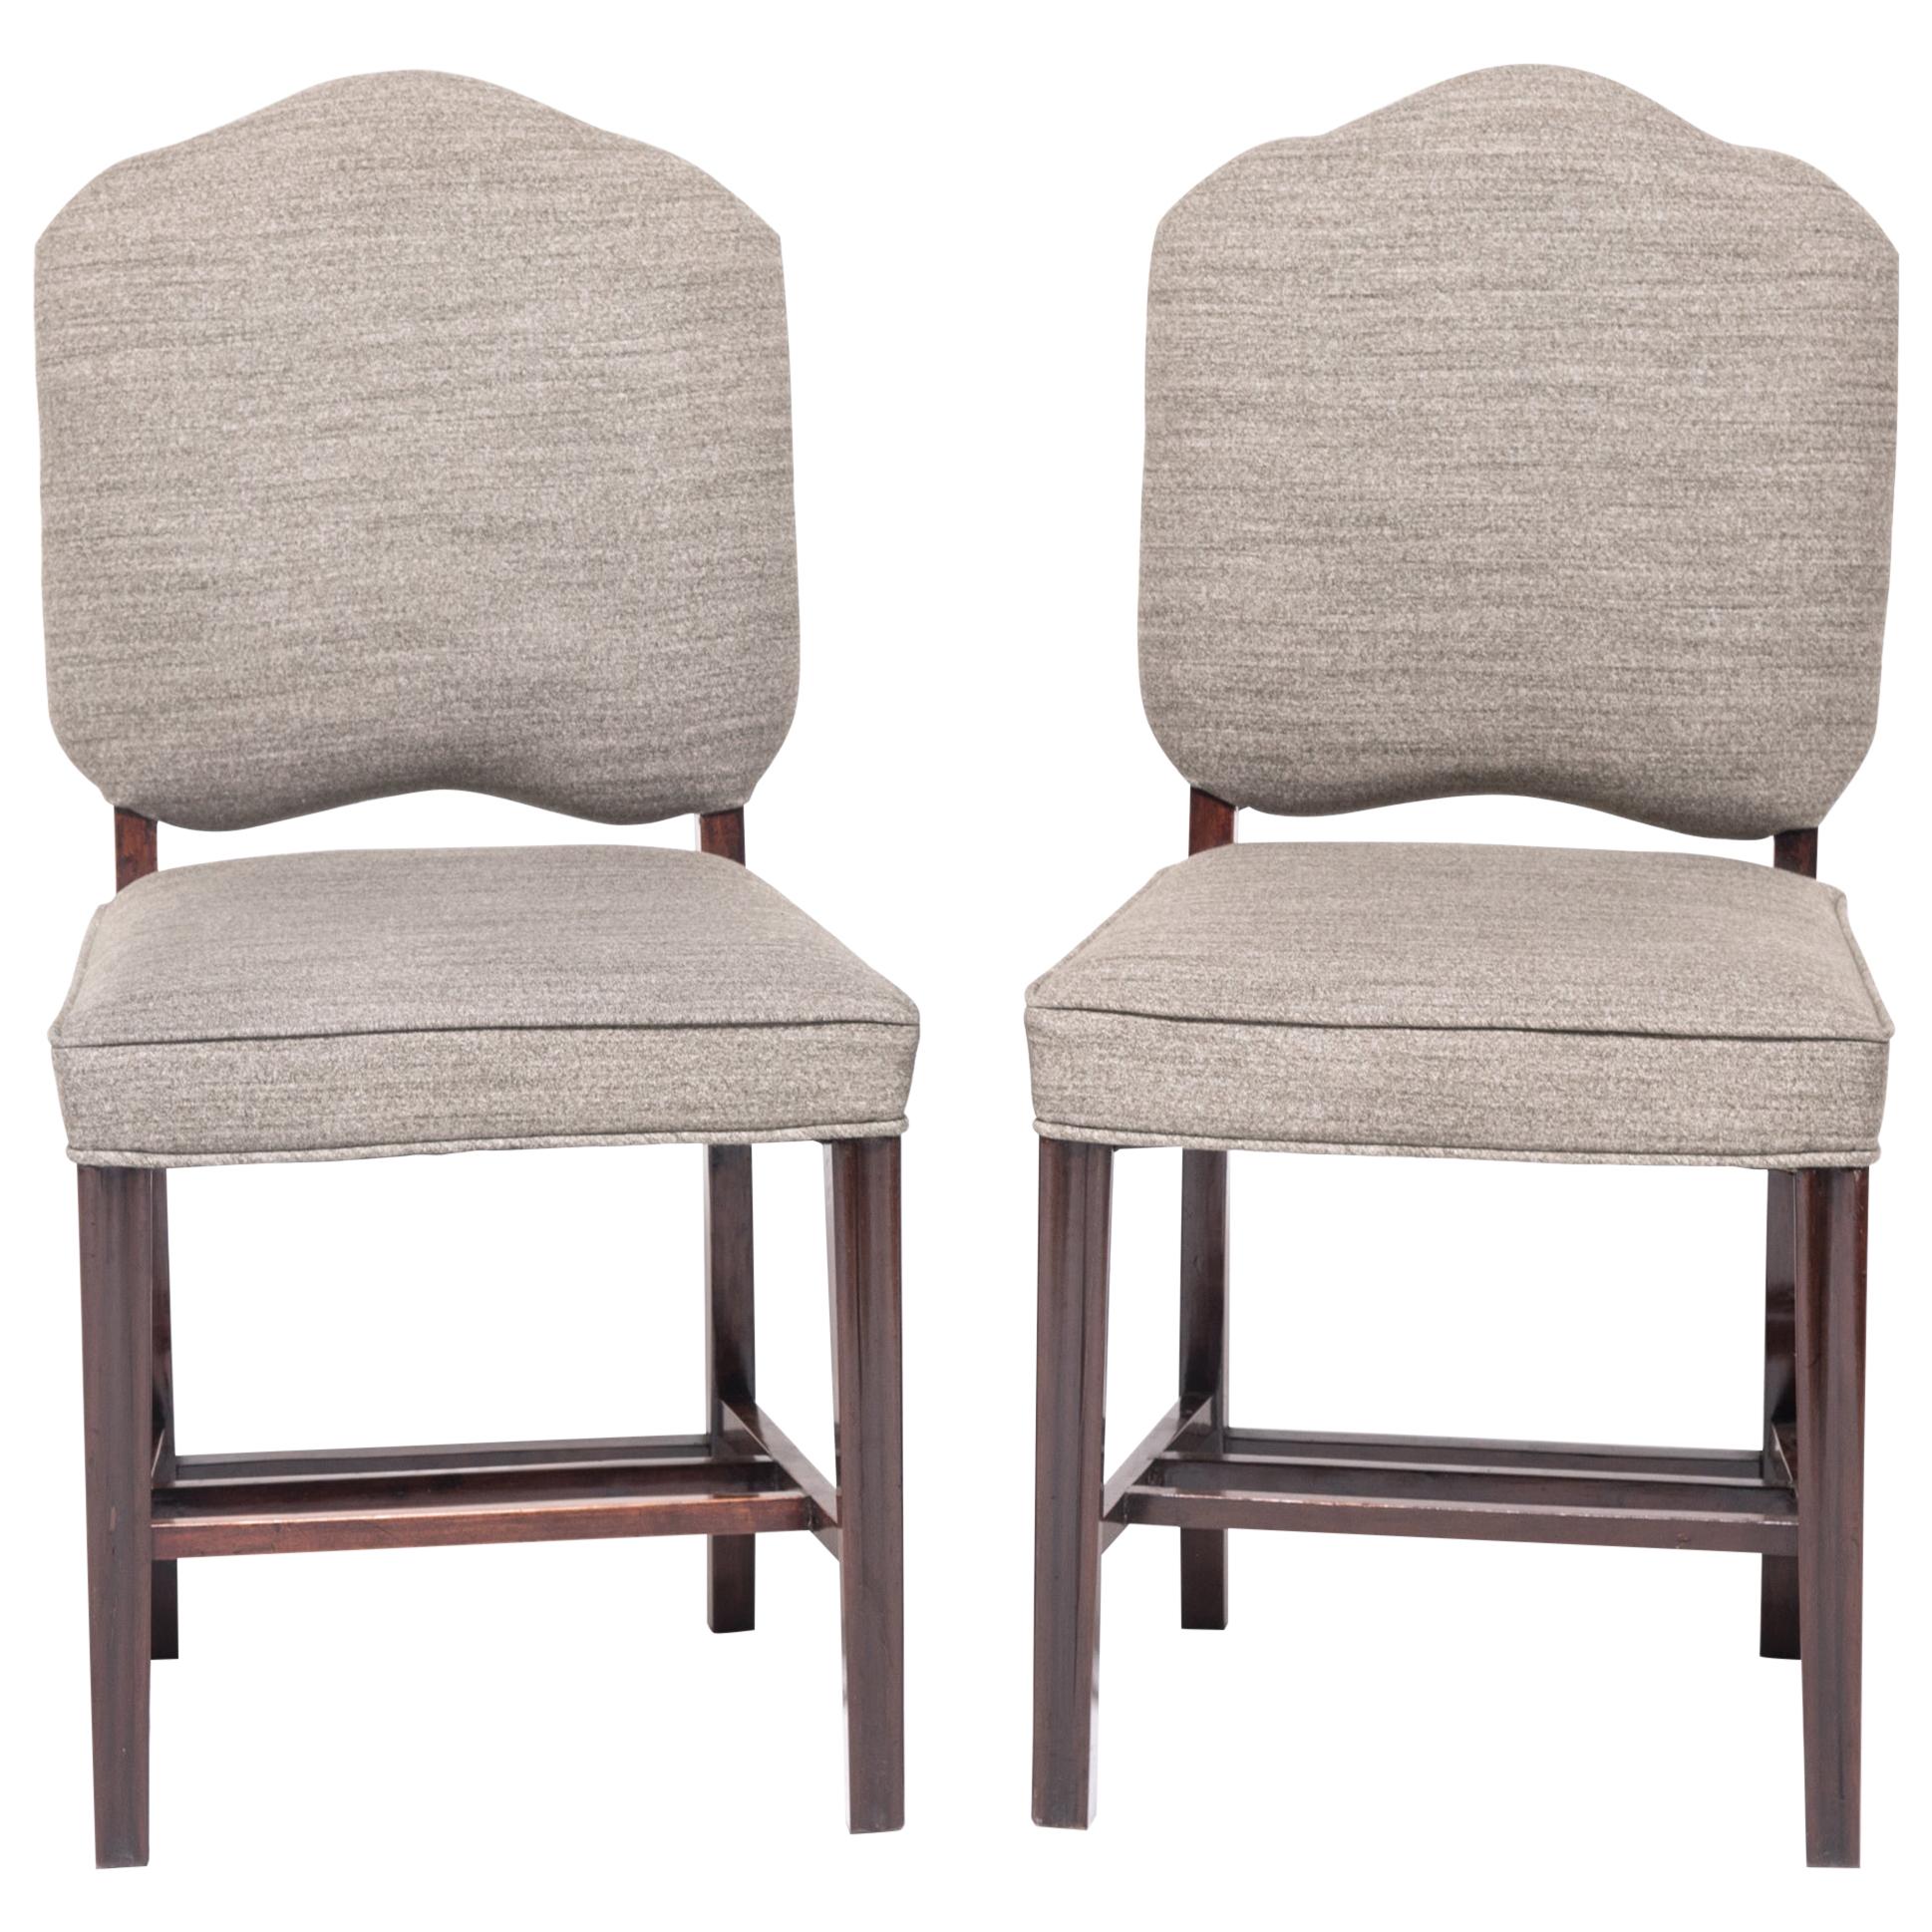 Pair of Chinese Art Deco Dining Chairs, circa 1920-1930s For Sale